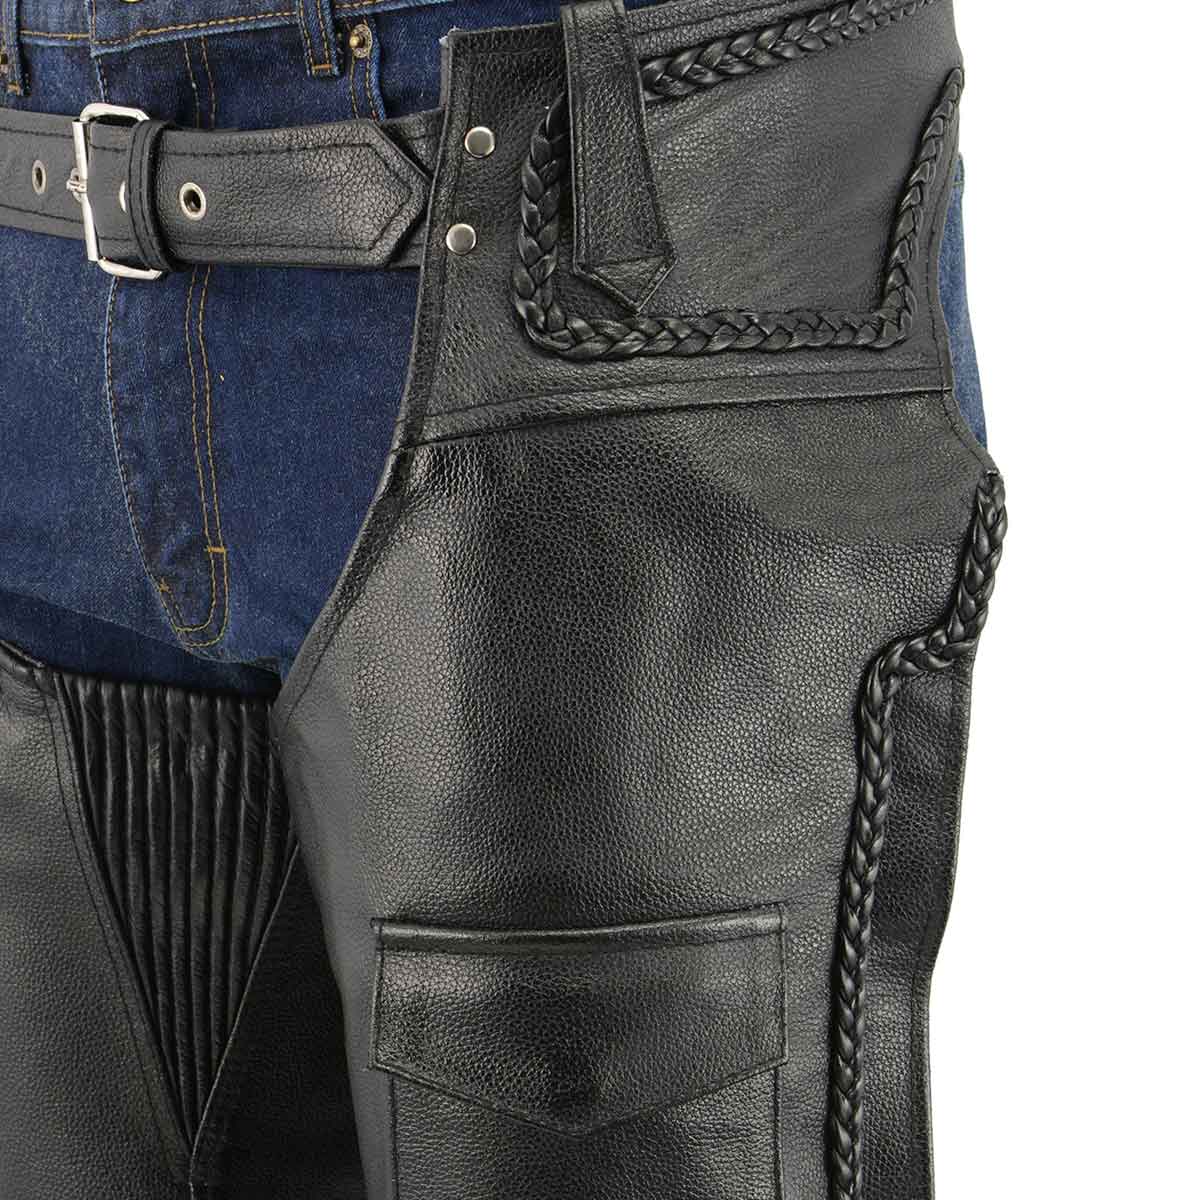 Men's XS406 Classic Black Braided Thermal Lined Leather Motorcycle Chaps with Outside Flap Pocket